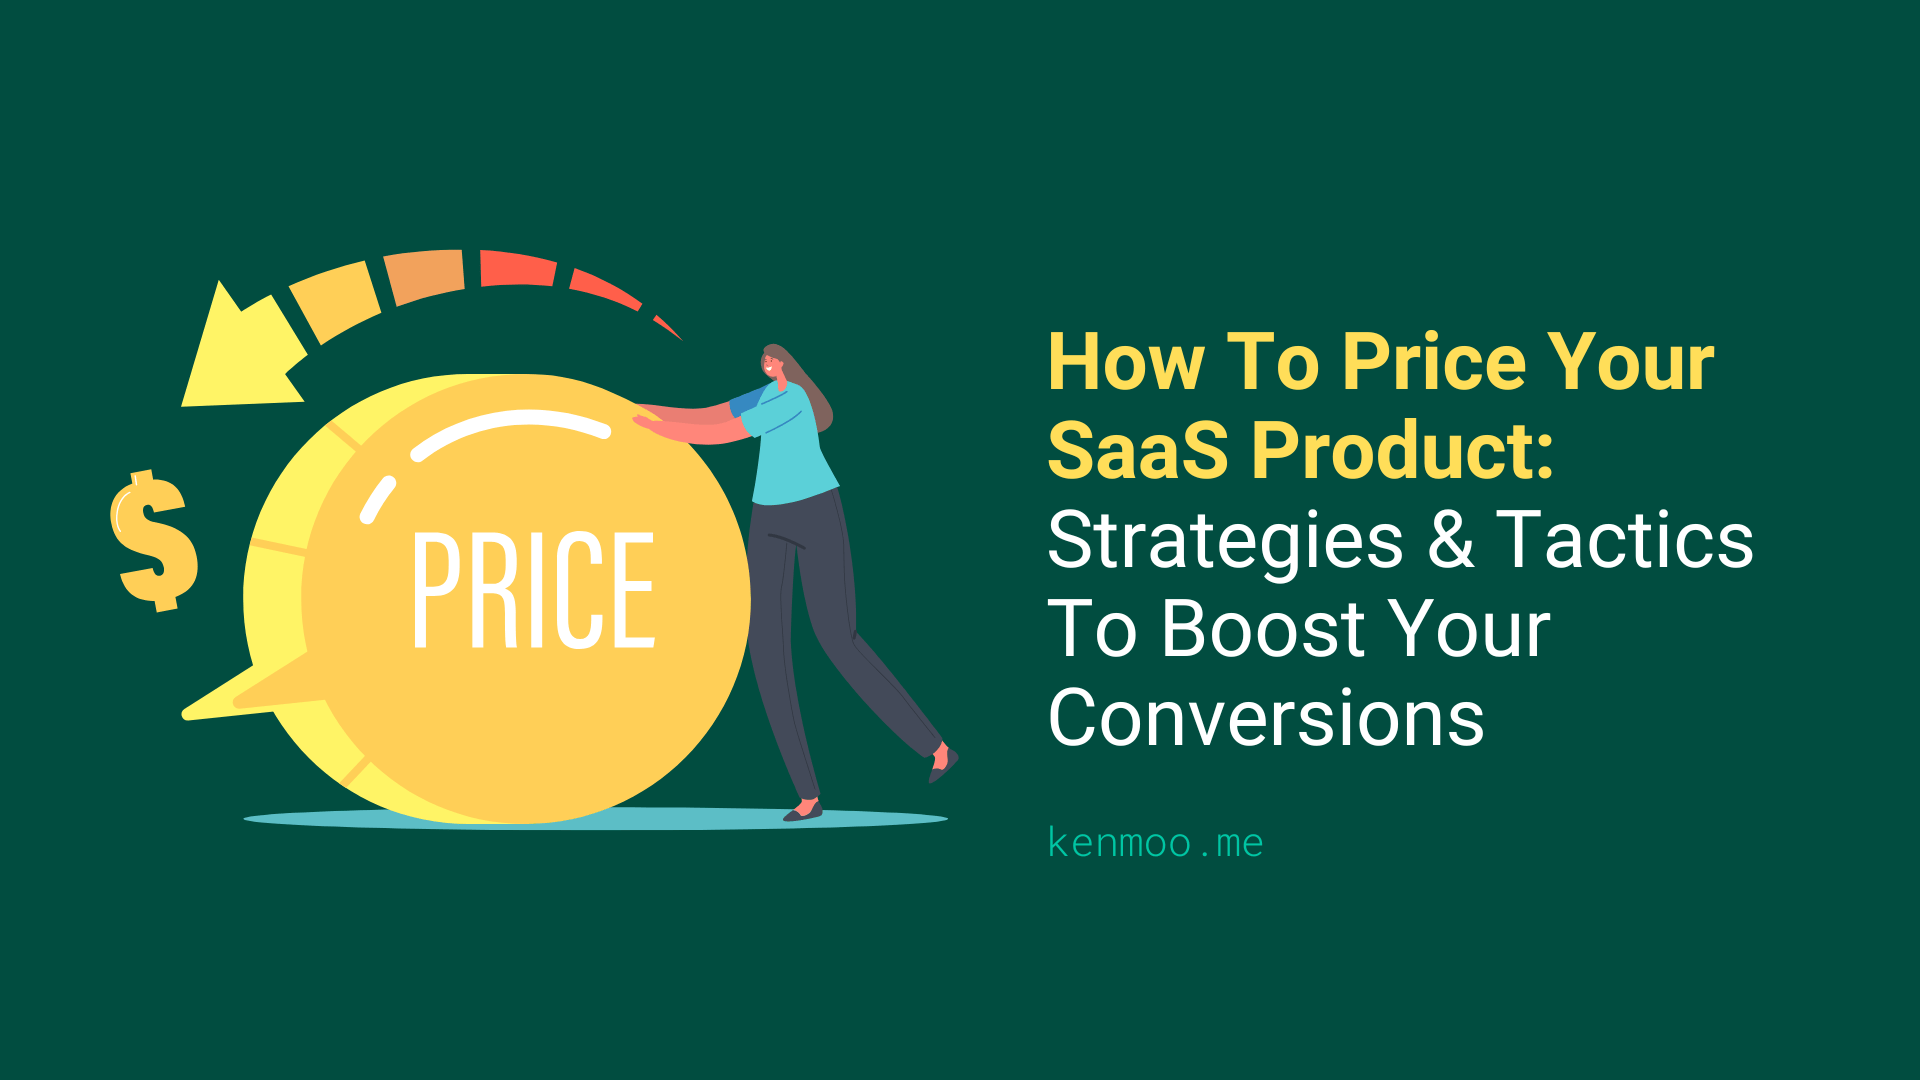 How To Price Your SaaS Product: Strategies & Tactics To Boost Your Conversions